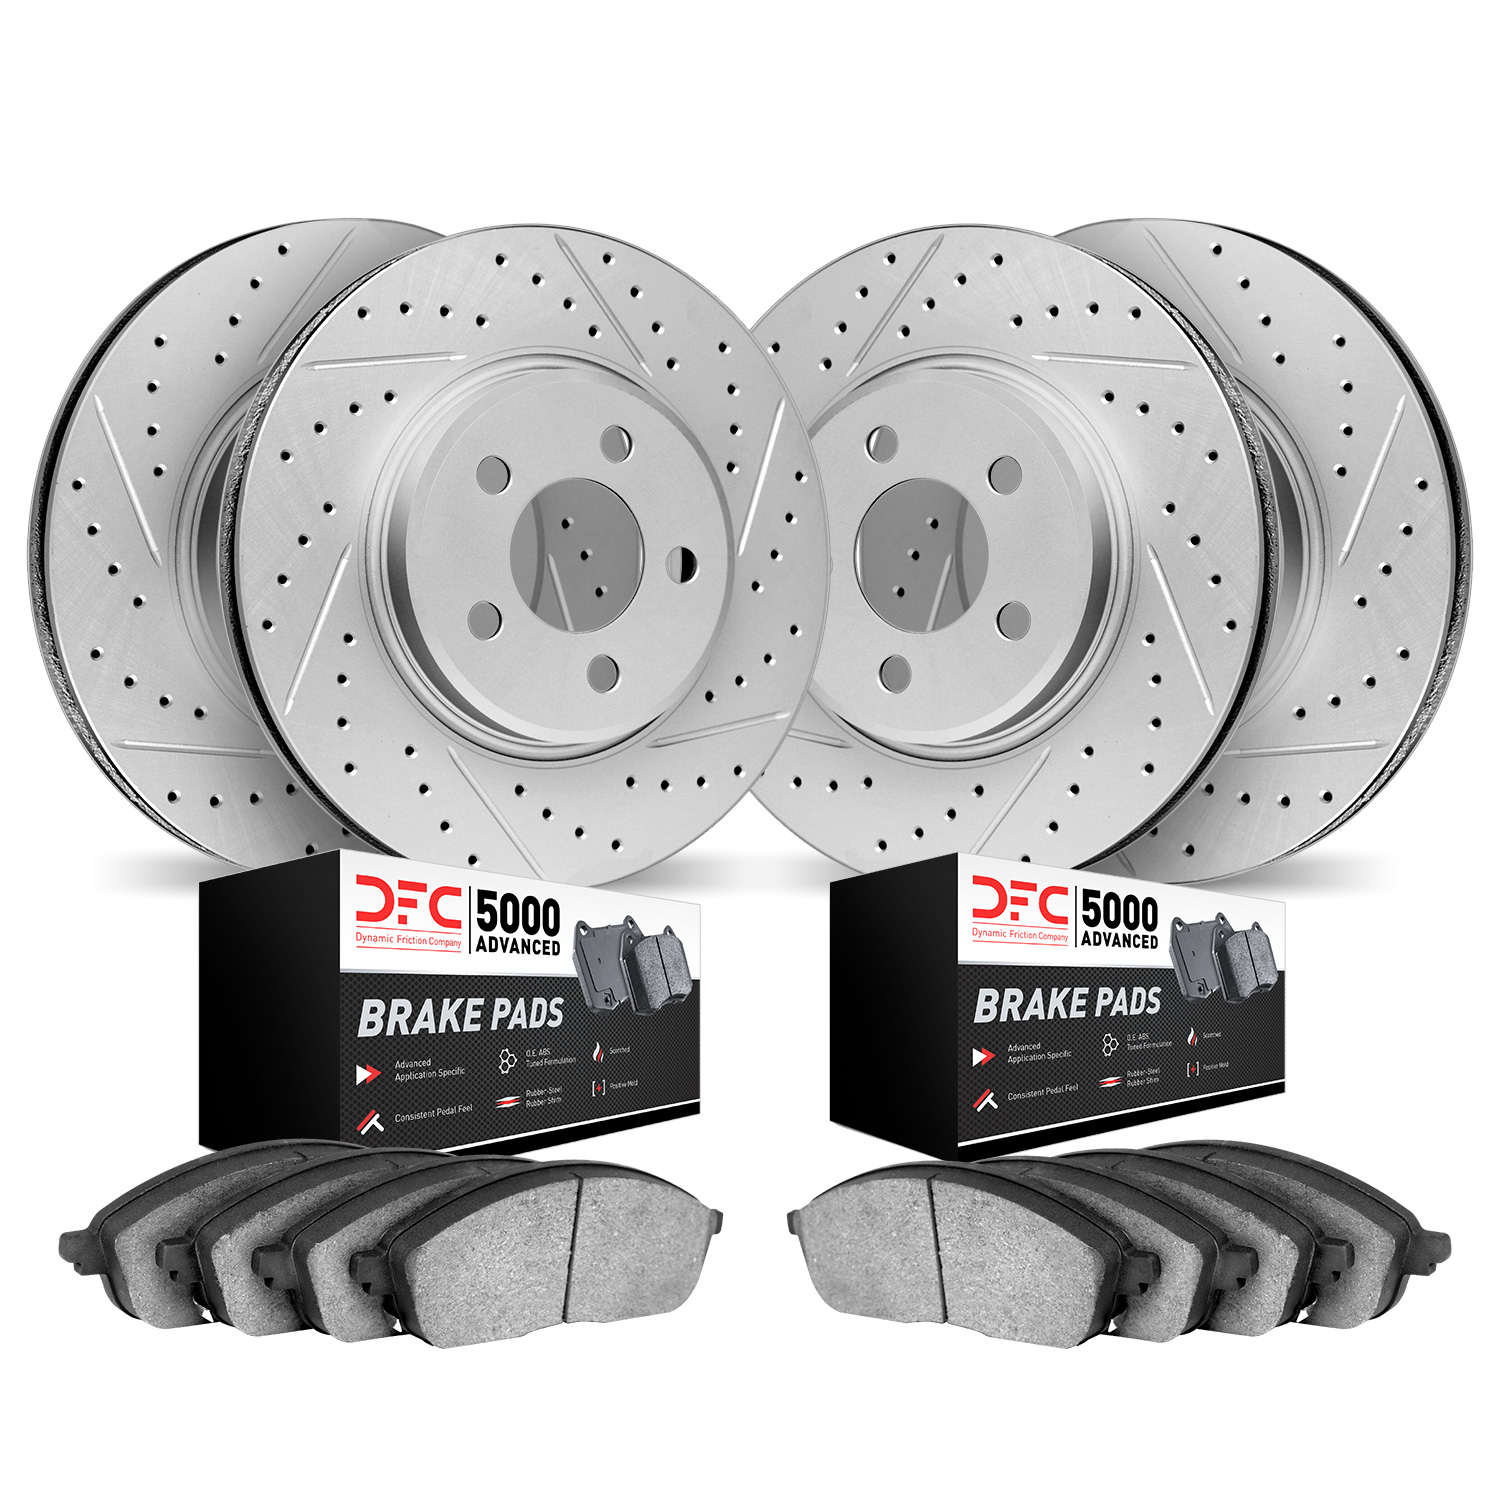 2504-31005 Geoperformance Drilled/Slotted Rotors w/5000 Advanced Brake Pads Kit, 2006-2006 BMW, Position: Front and Rear